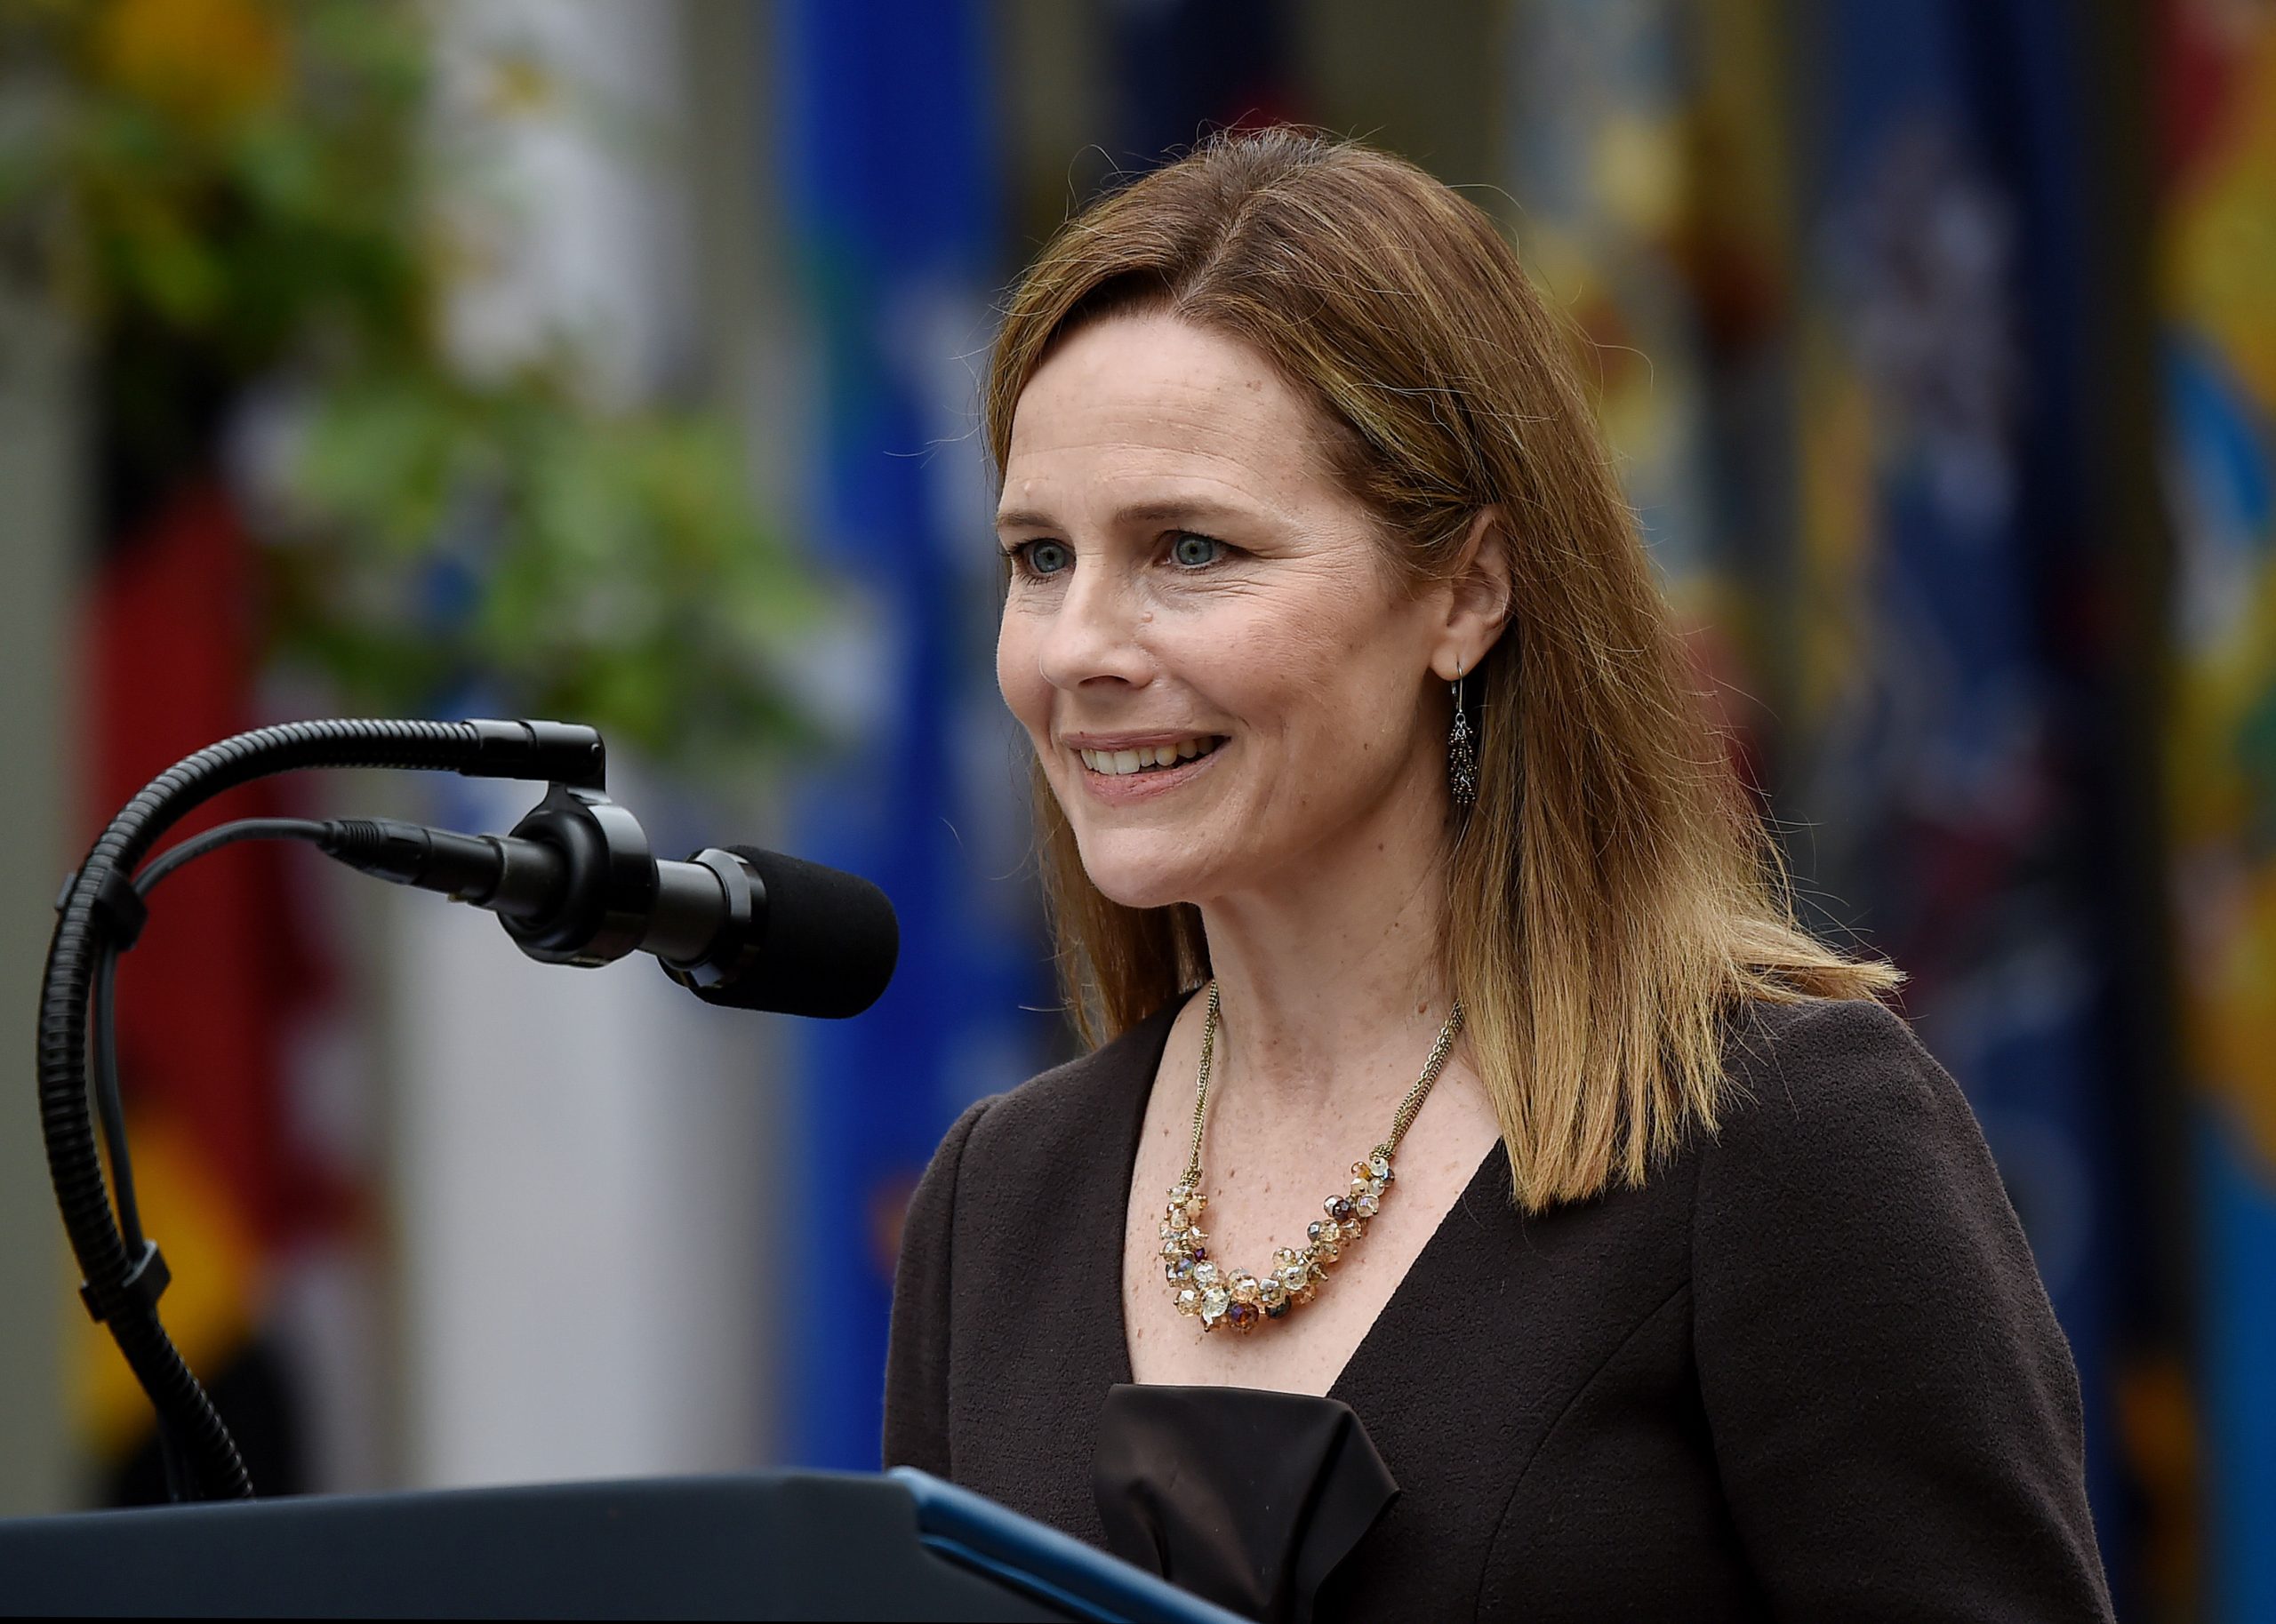 Here is how Donald Trump’s Supreme Court pick Amy Coney Barret can reshape the court